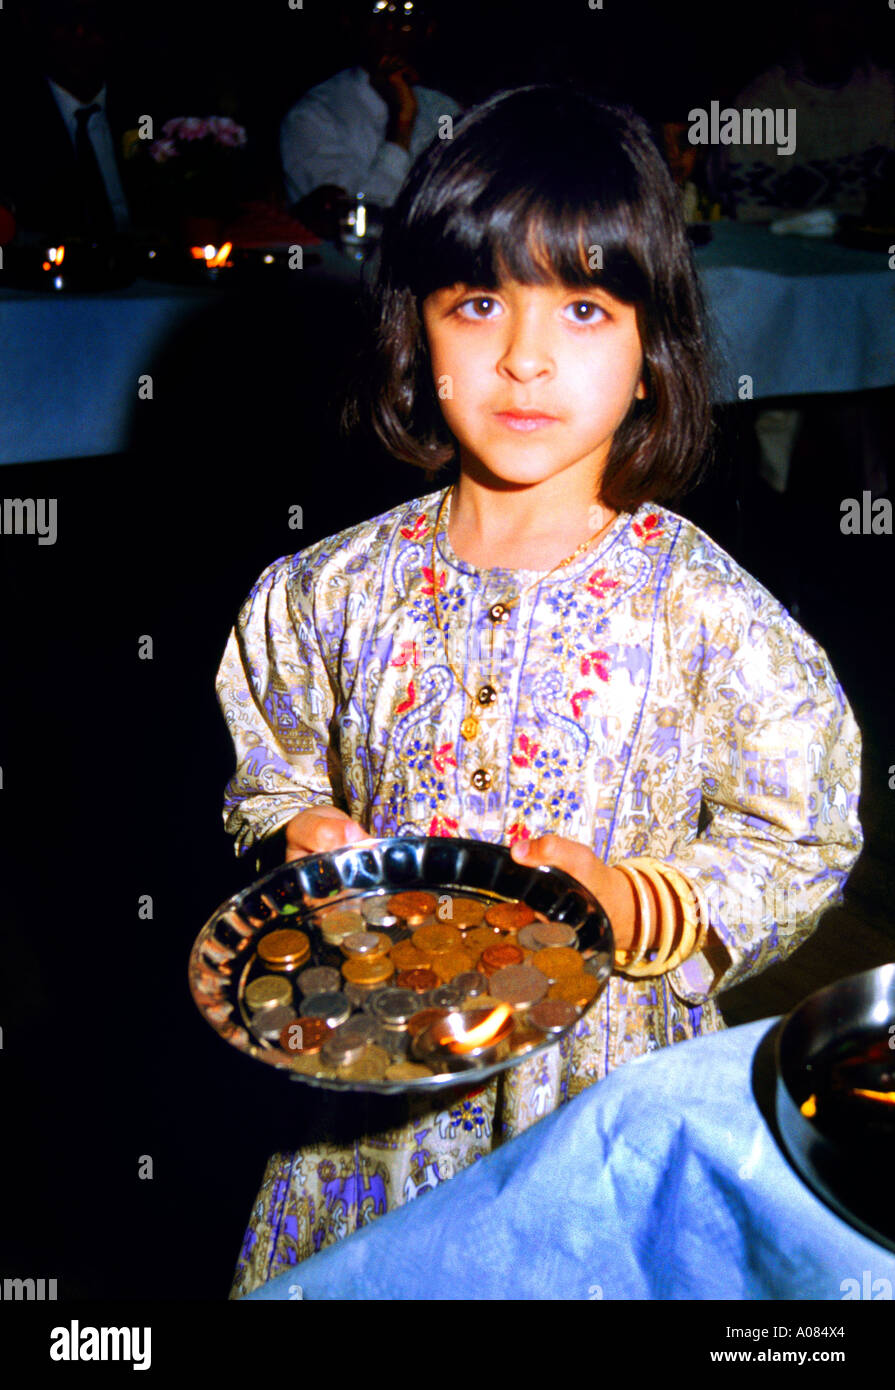 Girl holding a puja tray with  money Performing Chopda Puja During Diwali Signifying the Start of the new Financial year in the Hindu Calendar Stock Photo